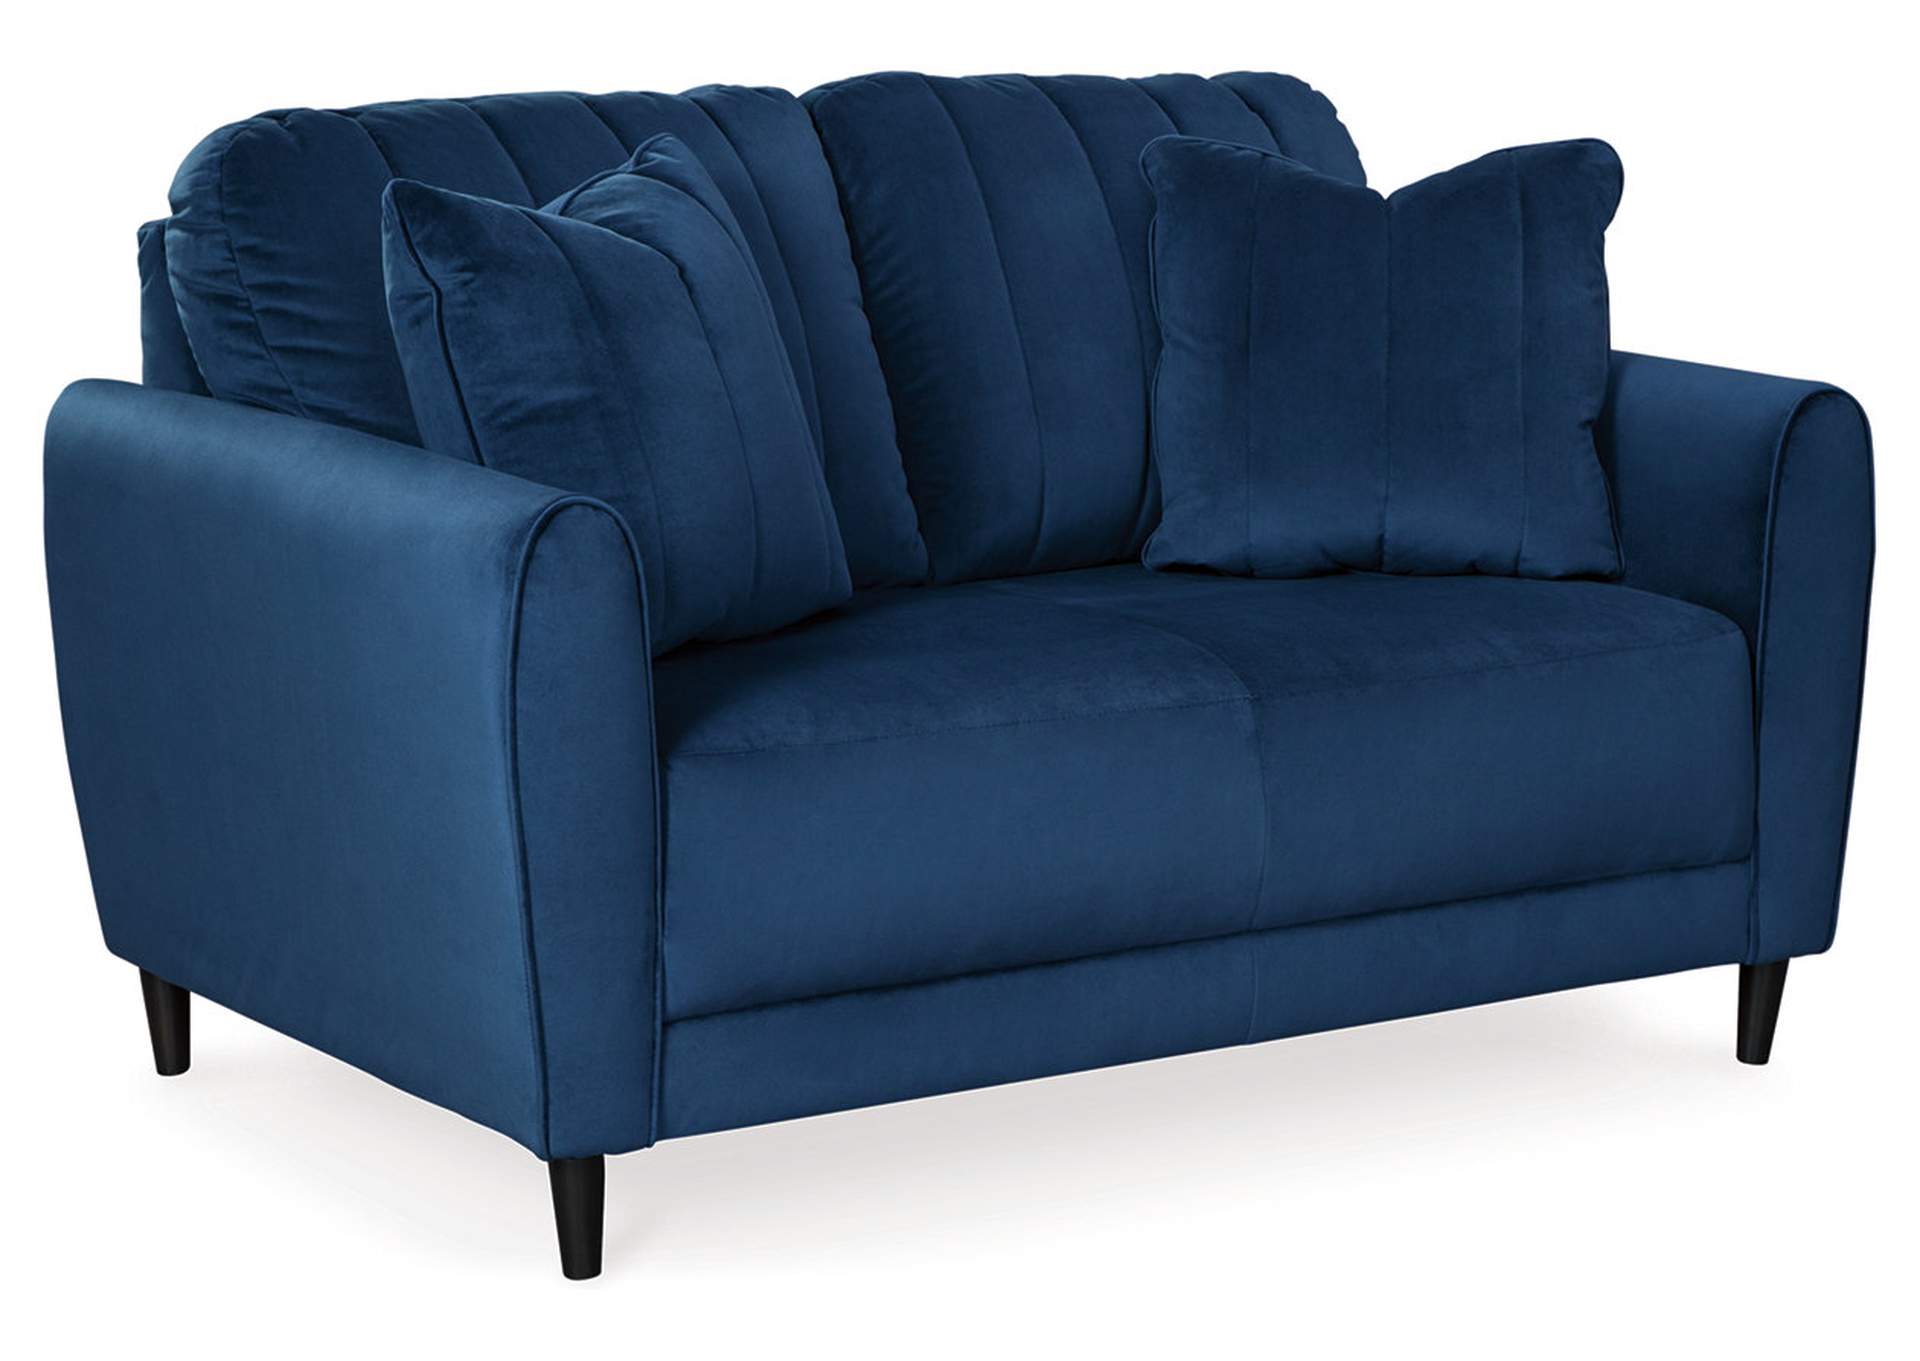 Enderlin Sofa and Loveseat,Signature Design By Ashley